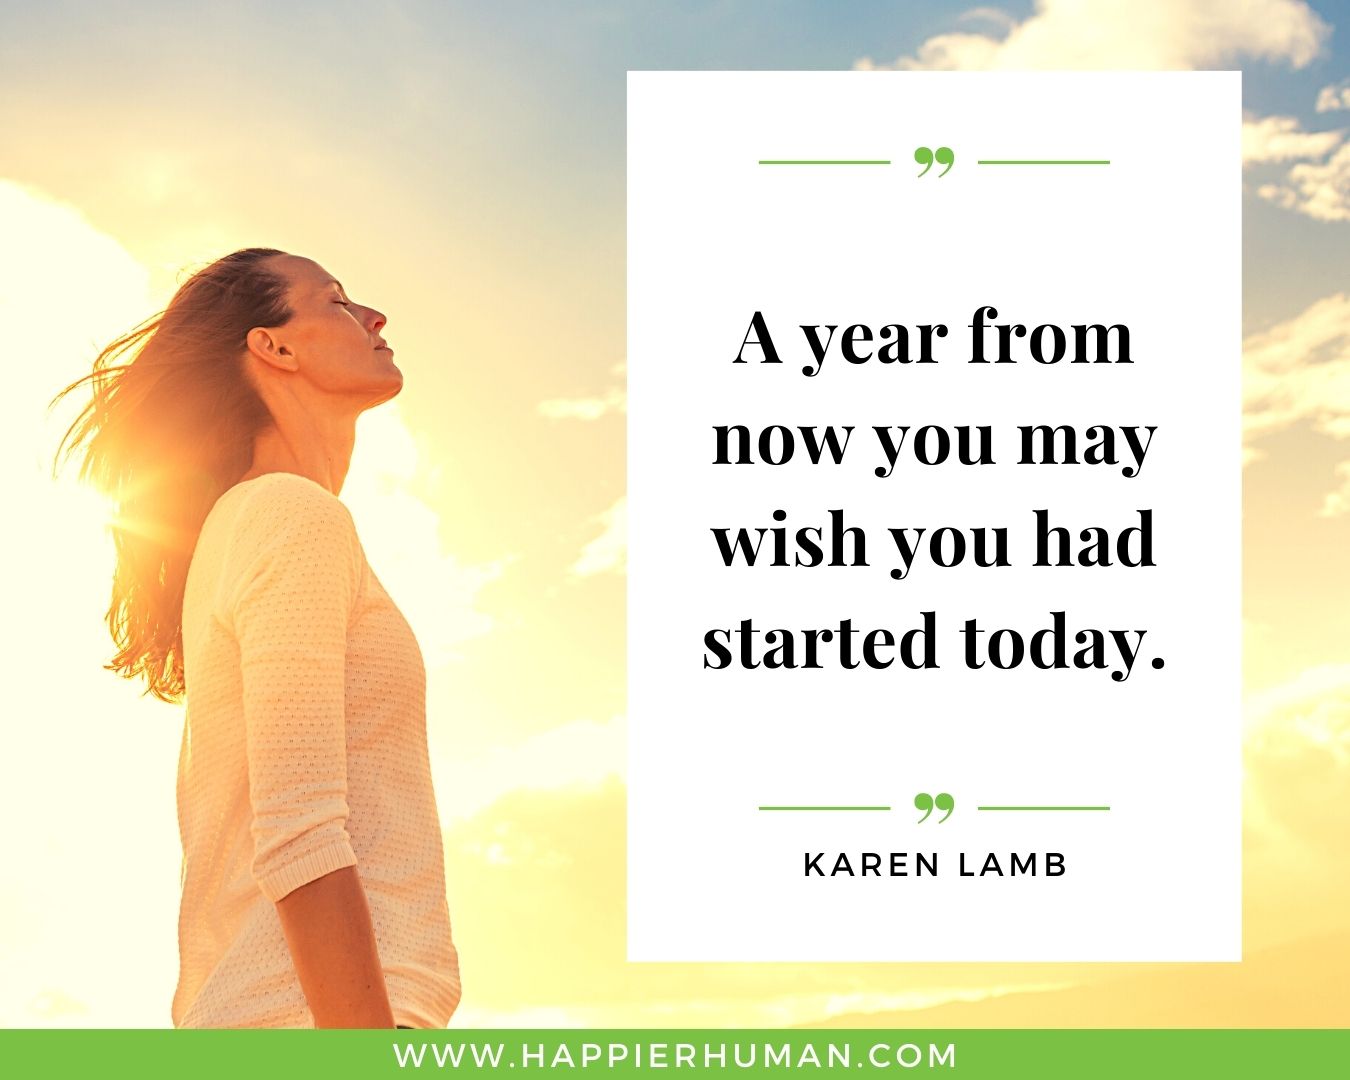 Overthinking Quotes - “A year from now you may wish you had started today.” – Karen Lamb